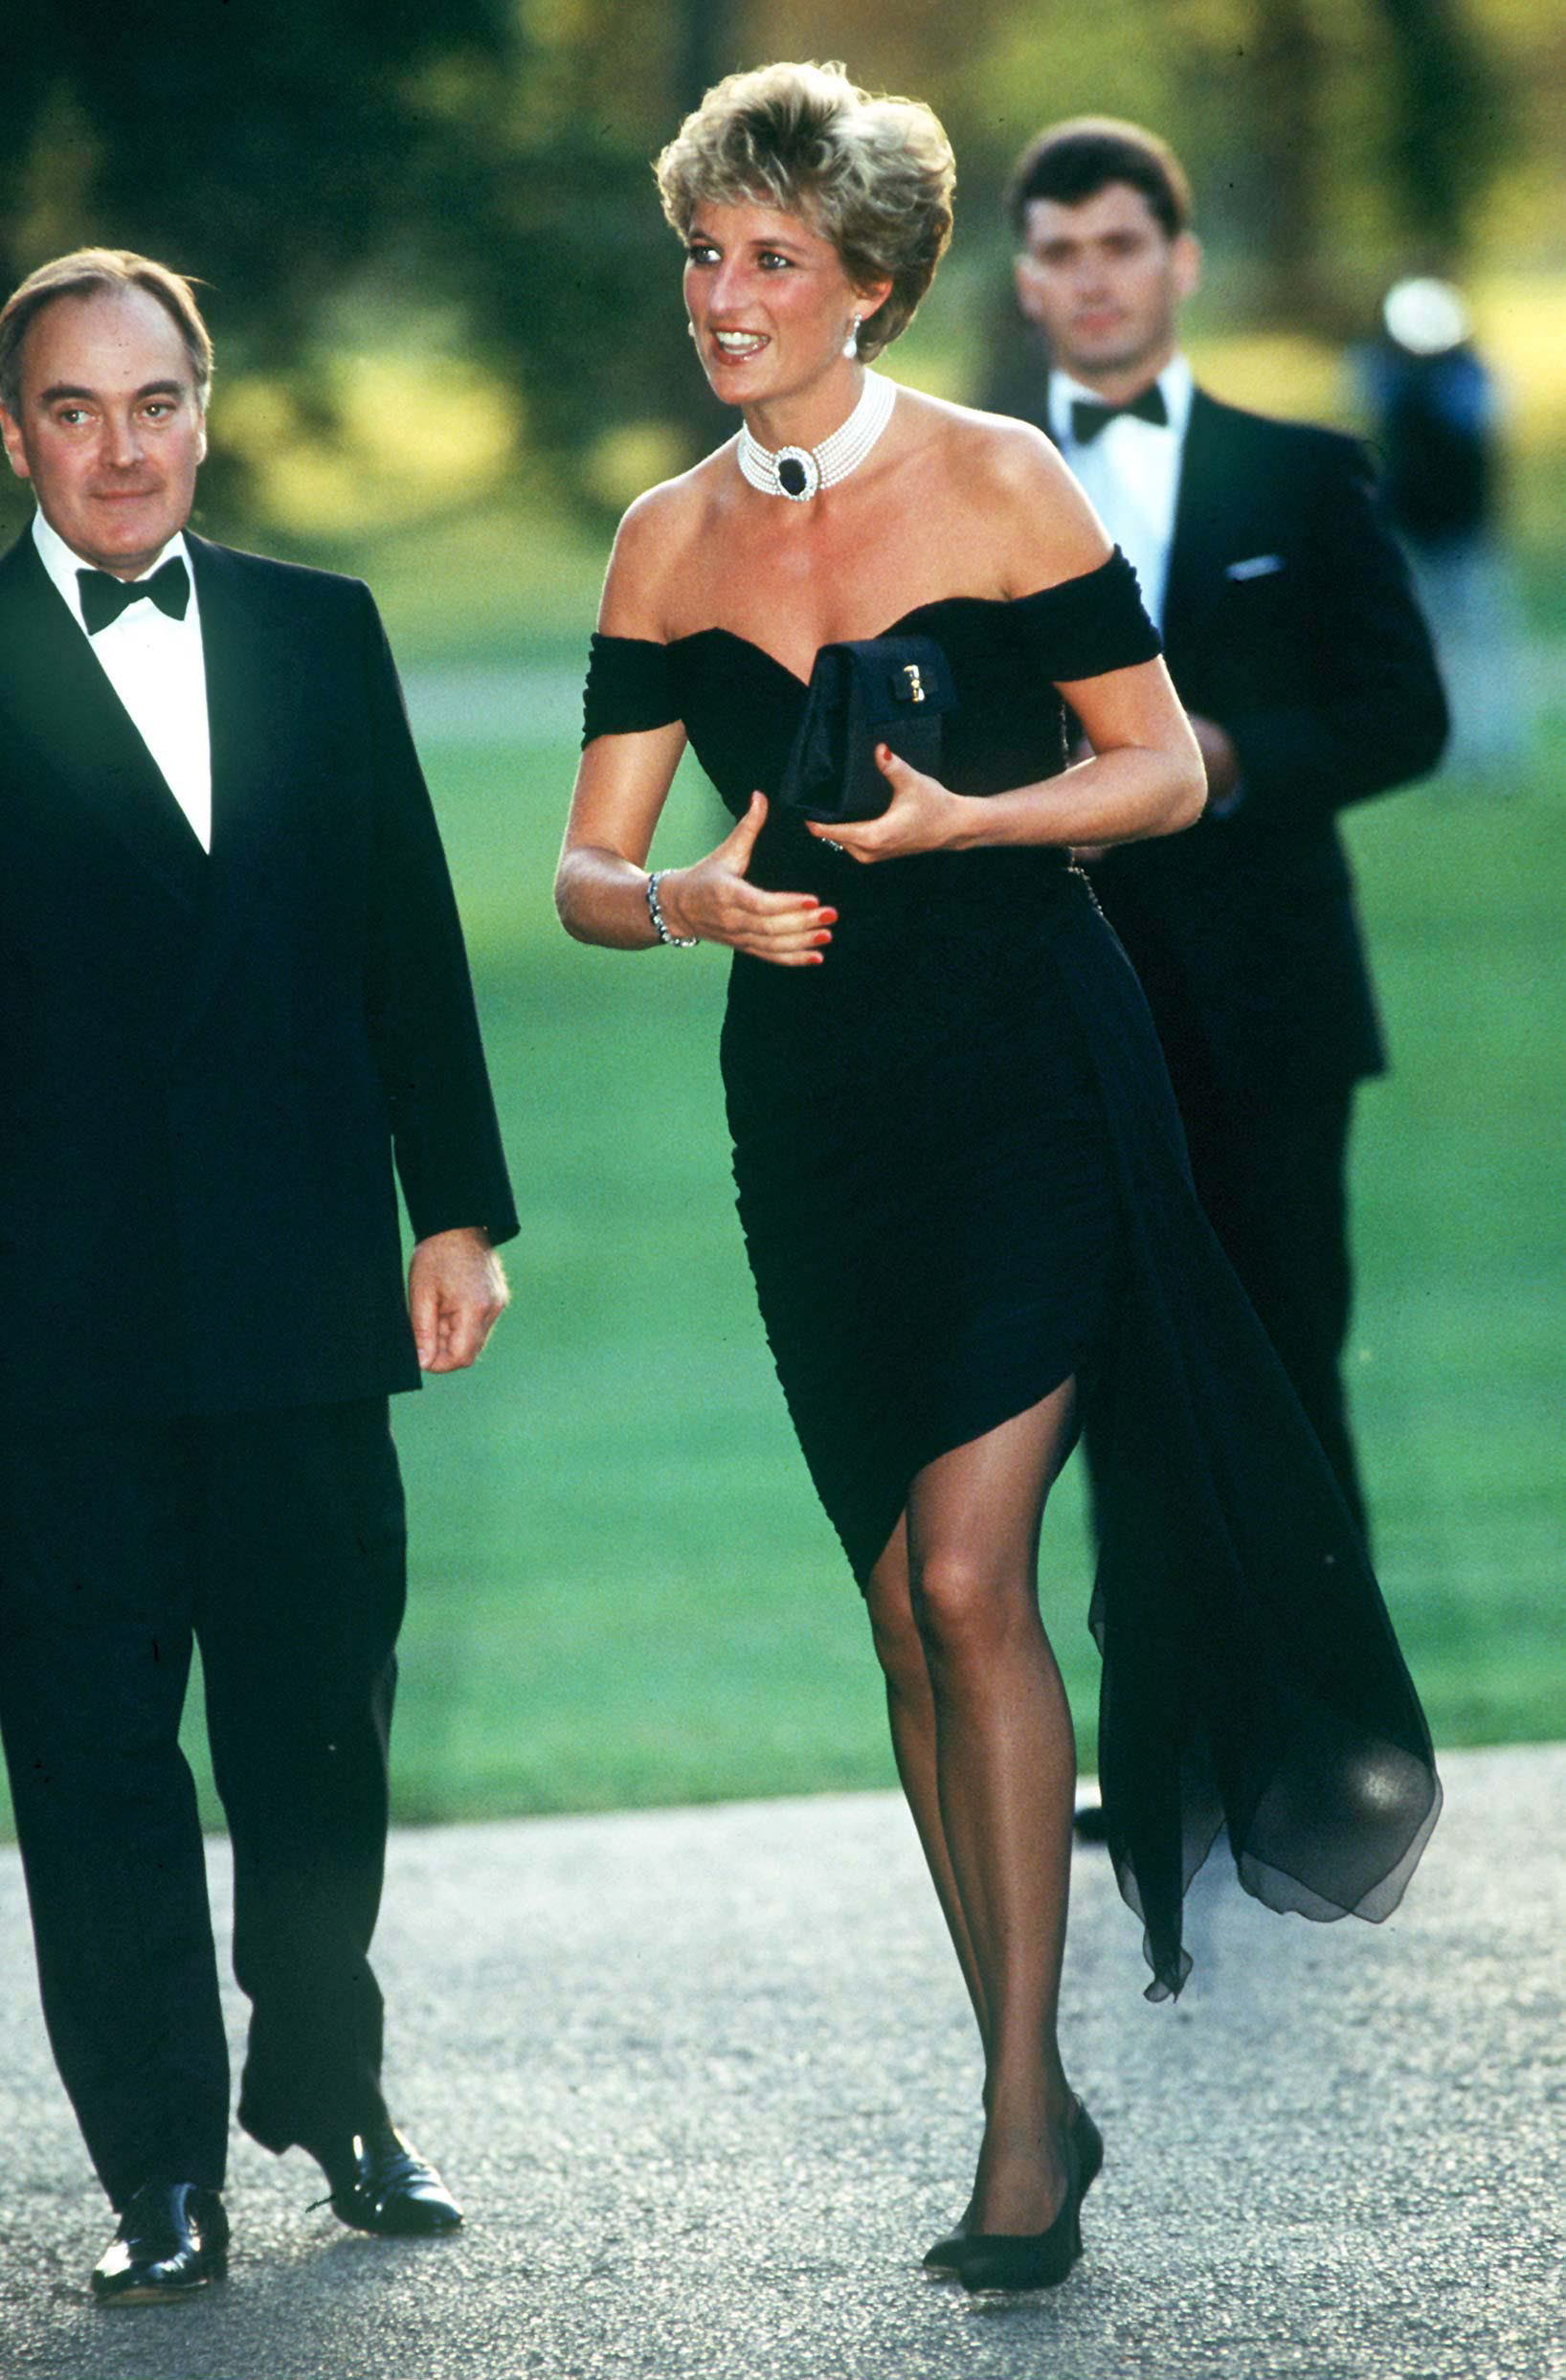 Princess Diana in the "revenge dress" created by Christina Stambolian, attending the Vanity Fair party at the Serpentine Gallery in London on June 29, 1994 | Source: Getty Images